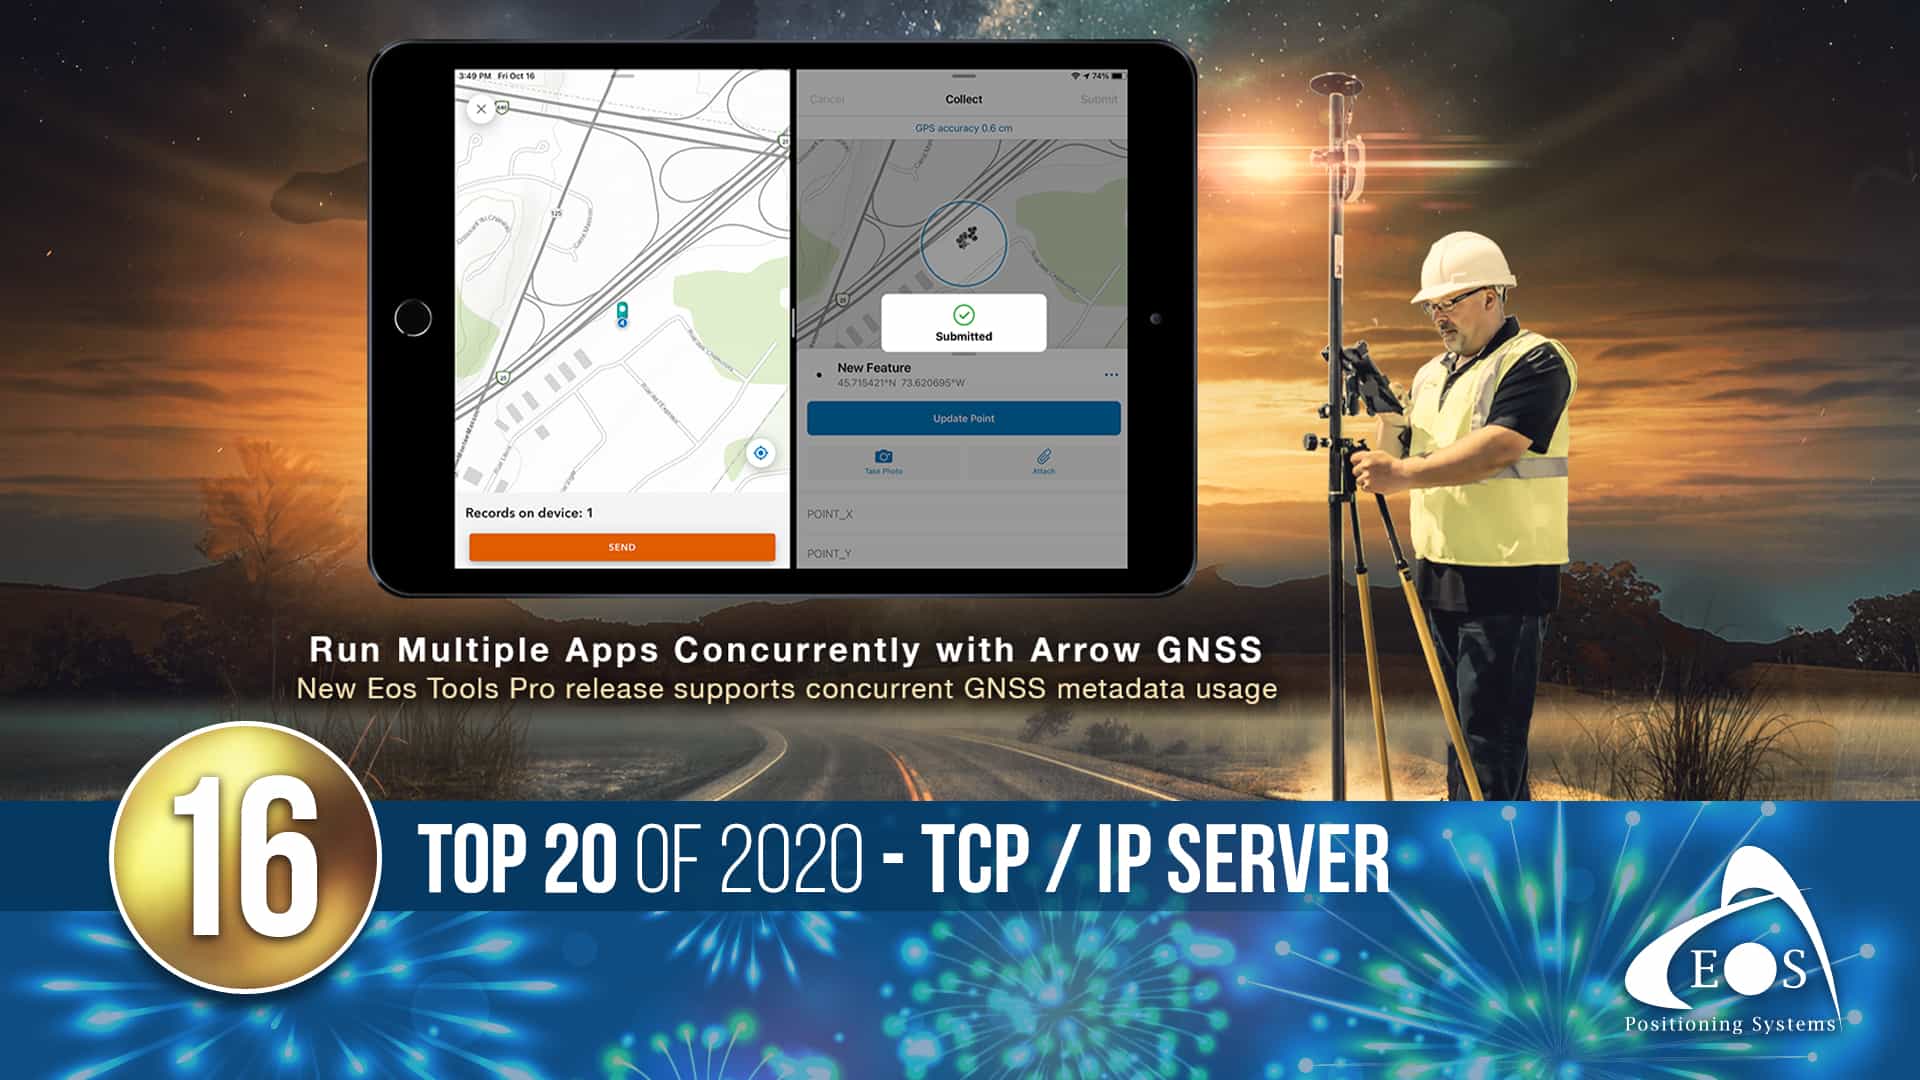 Eos Positioning Systems blog top articles of 2020: 16 - TCP _ IP Server